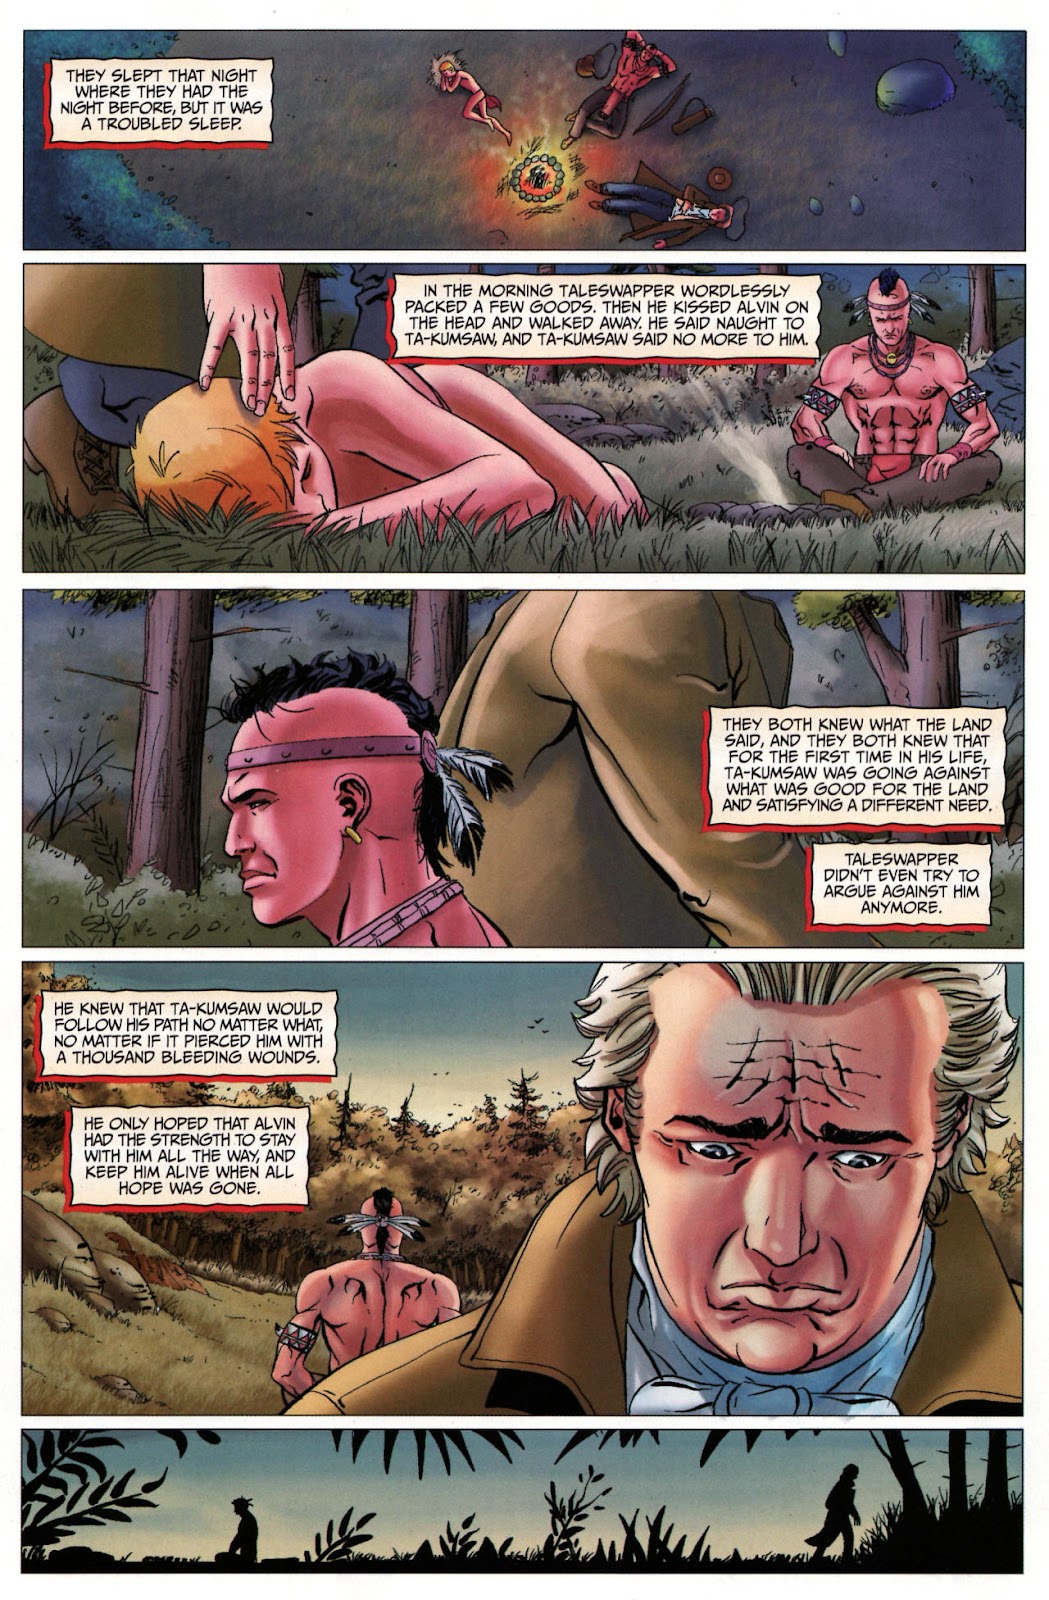 Red Prophet: The Tales of Alvin Maker issue 12 - Page 10